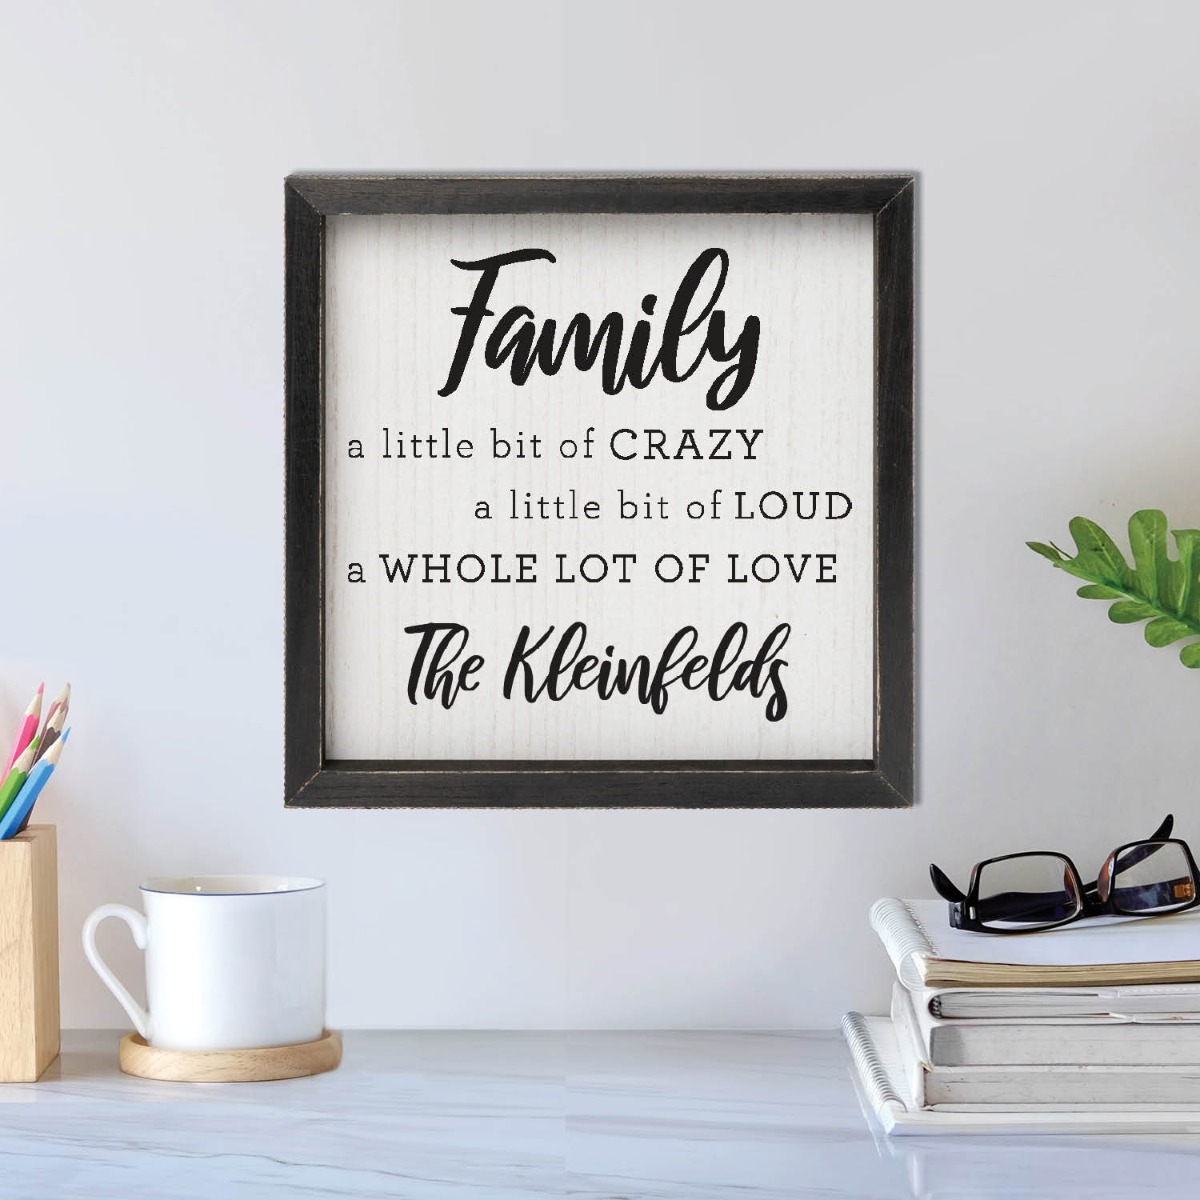 Black Framed Whole Lot Of Love Personalized White Wood Wall Art